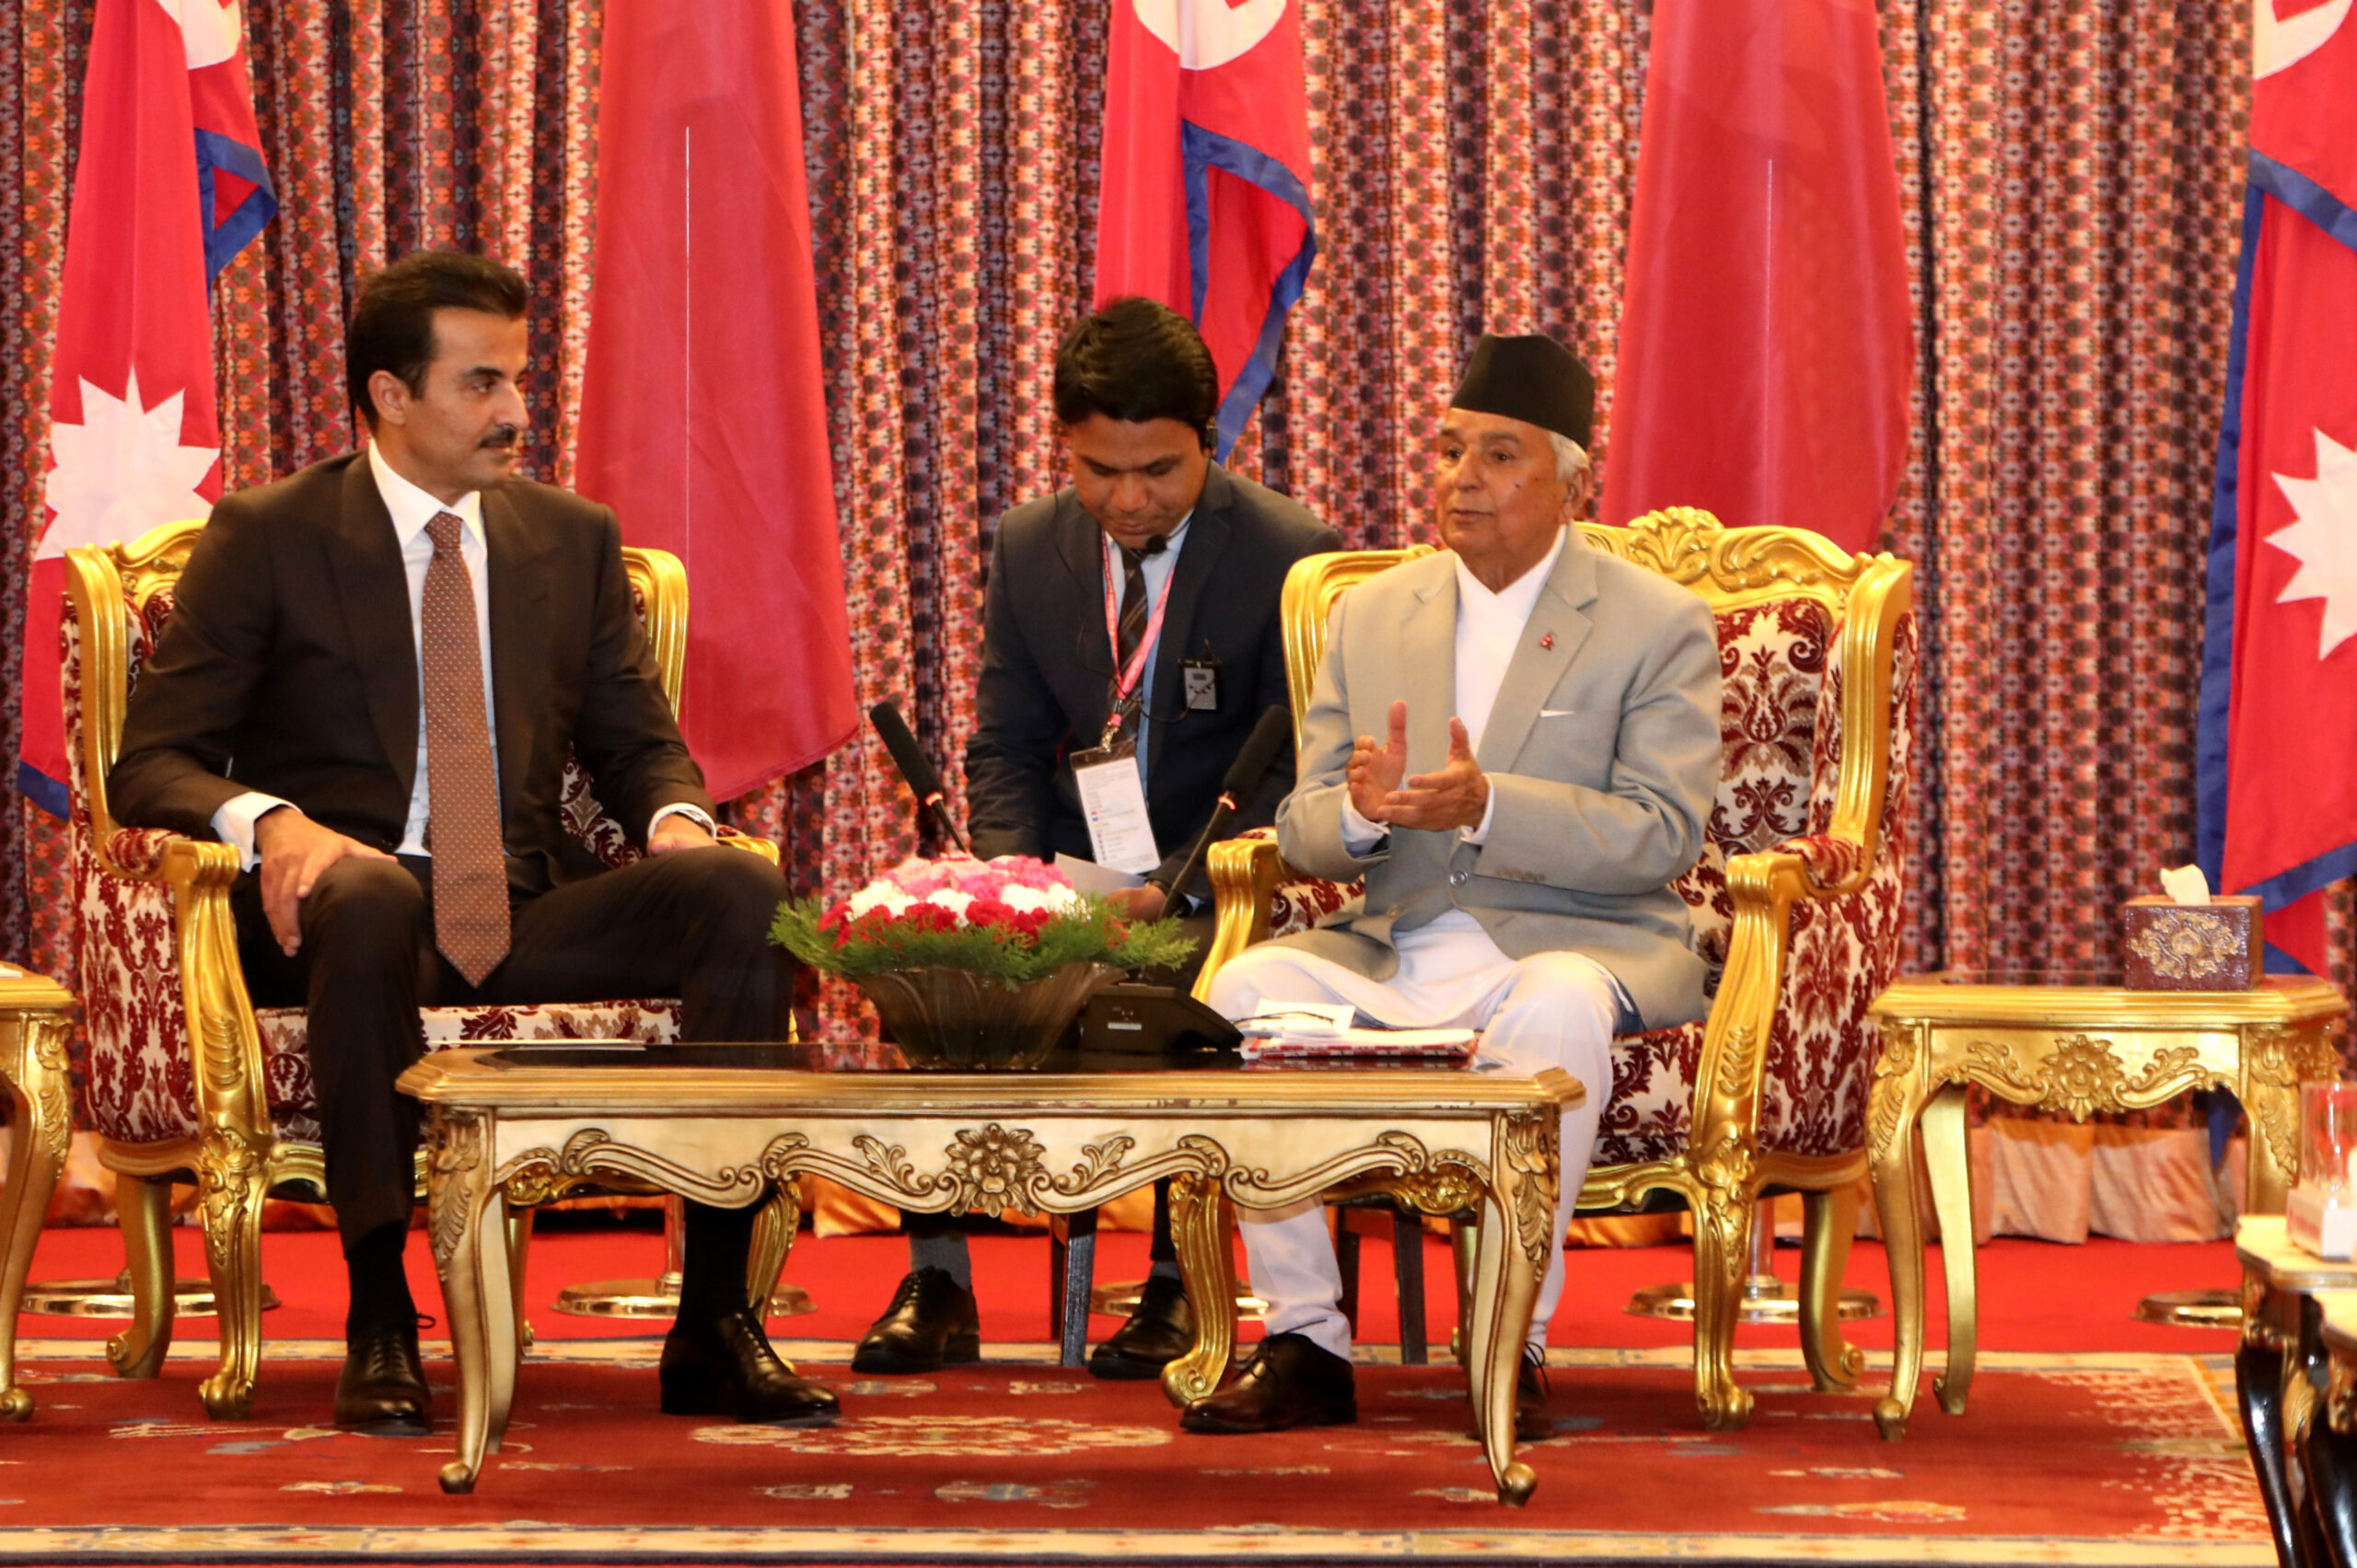 Qatar Emir in Nepal: Delegations of both nations to meet today